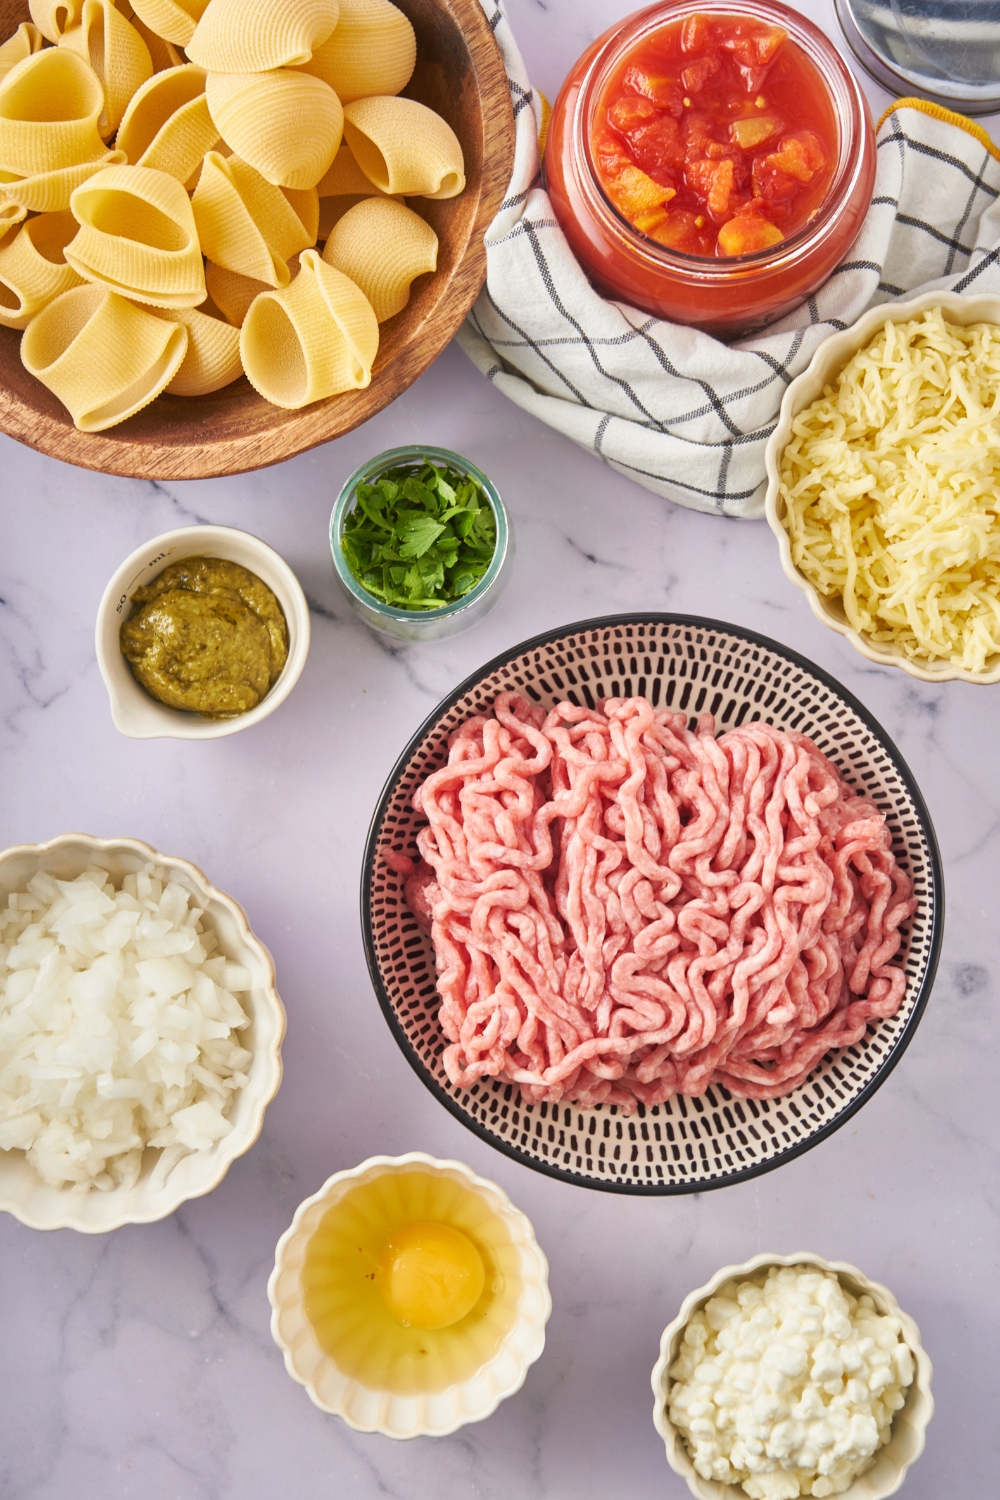 Overhead view of an assortment of ingredients including bowls of ground meat, tomato sauce, fresh herbs, pesto, dried pasta shells, diced onion, ricotta, and an unbeaten egg.